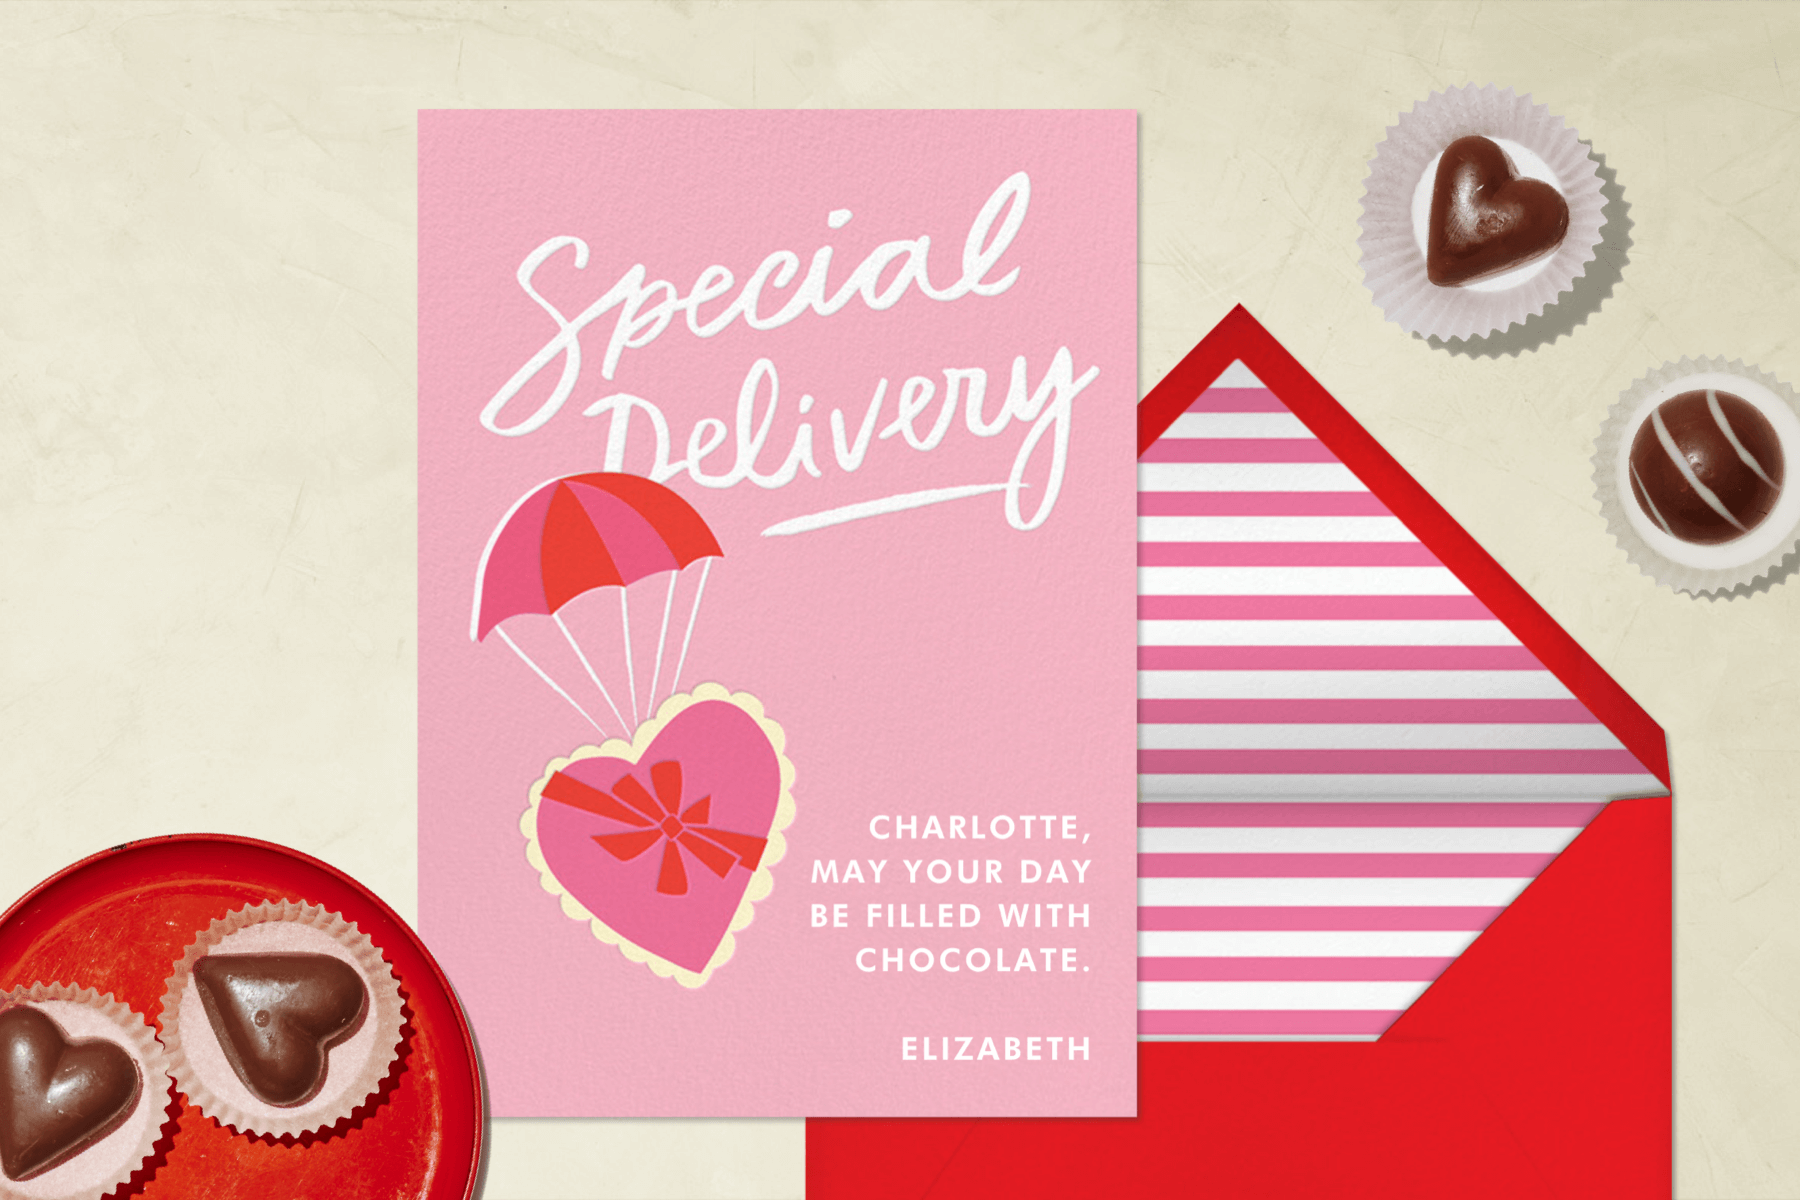 A Valentine’s Day card with a candy box wearing a parachute.